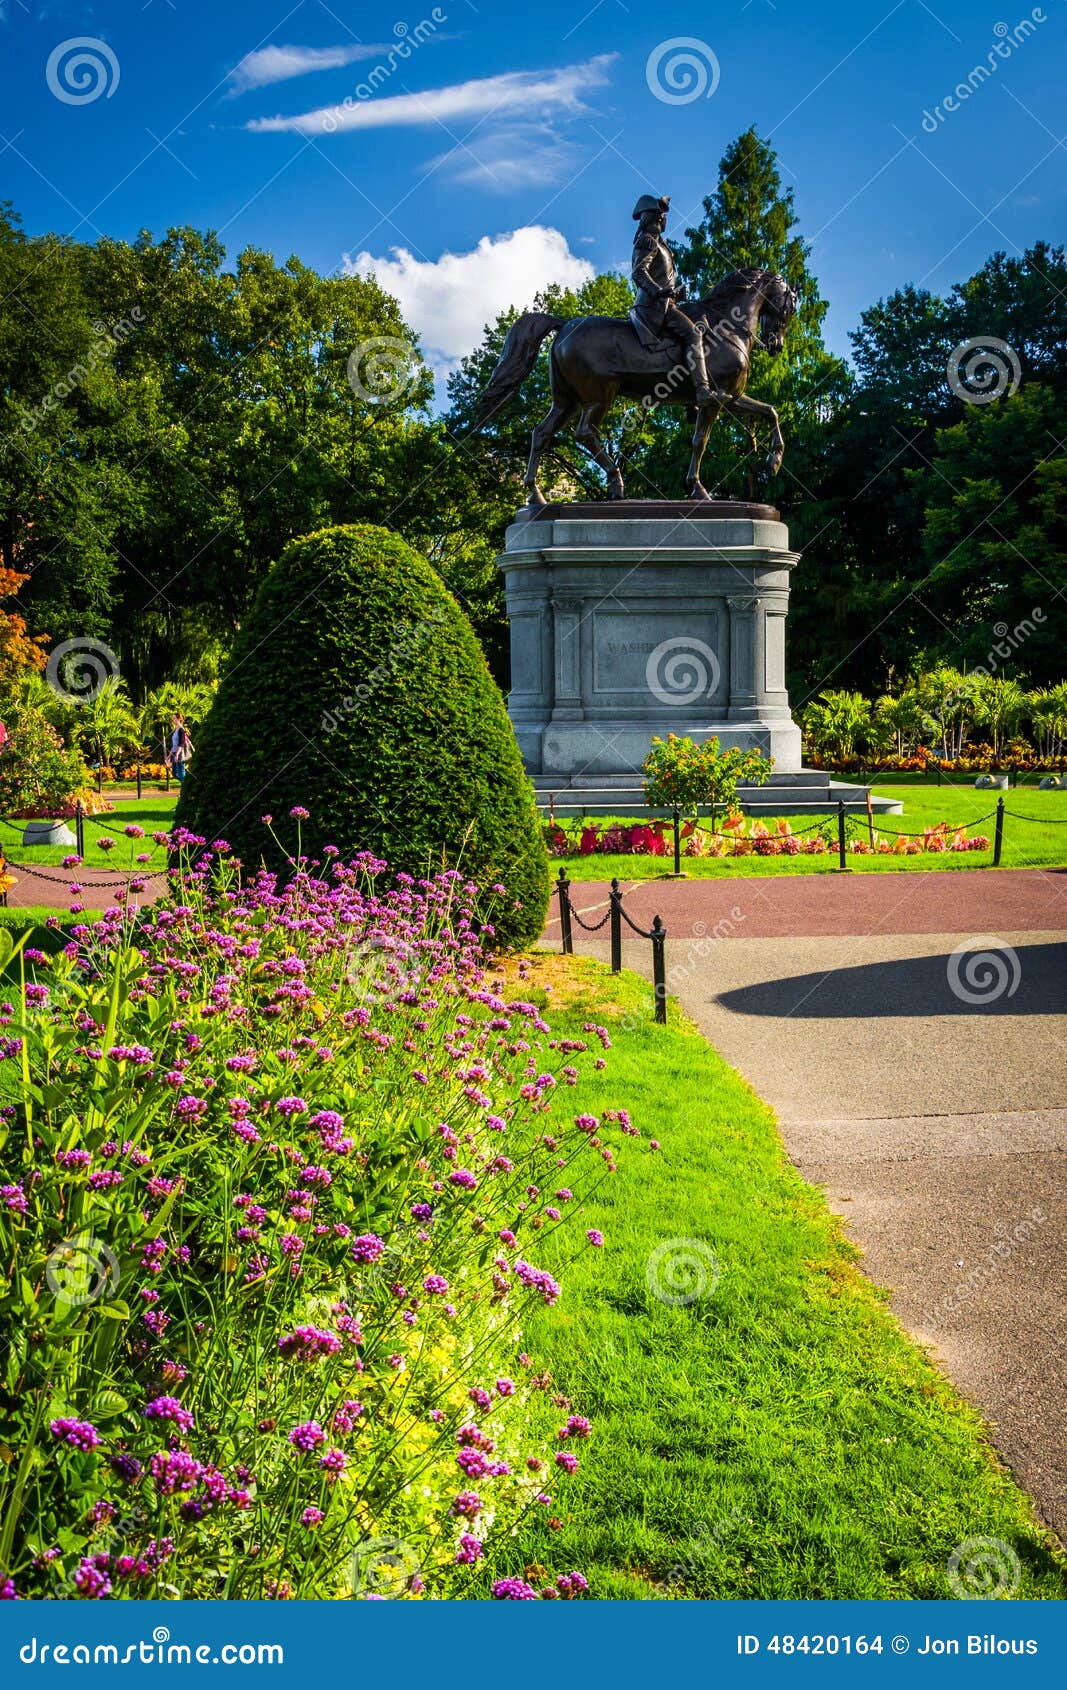 flowers and statue of george washington at the commons in boston